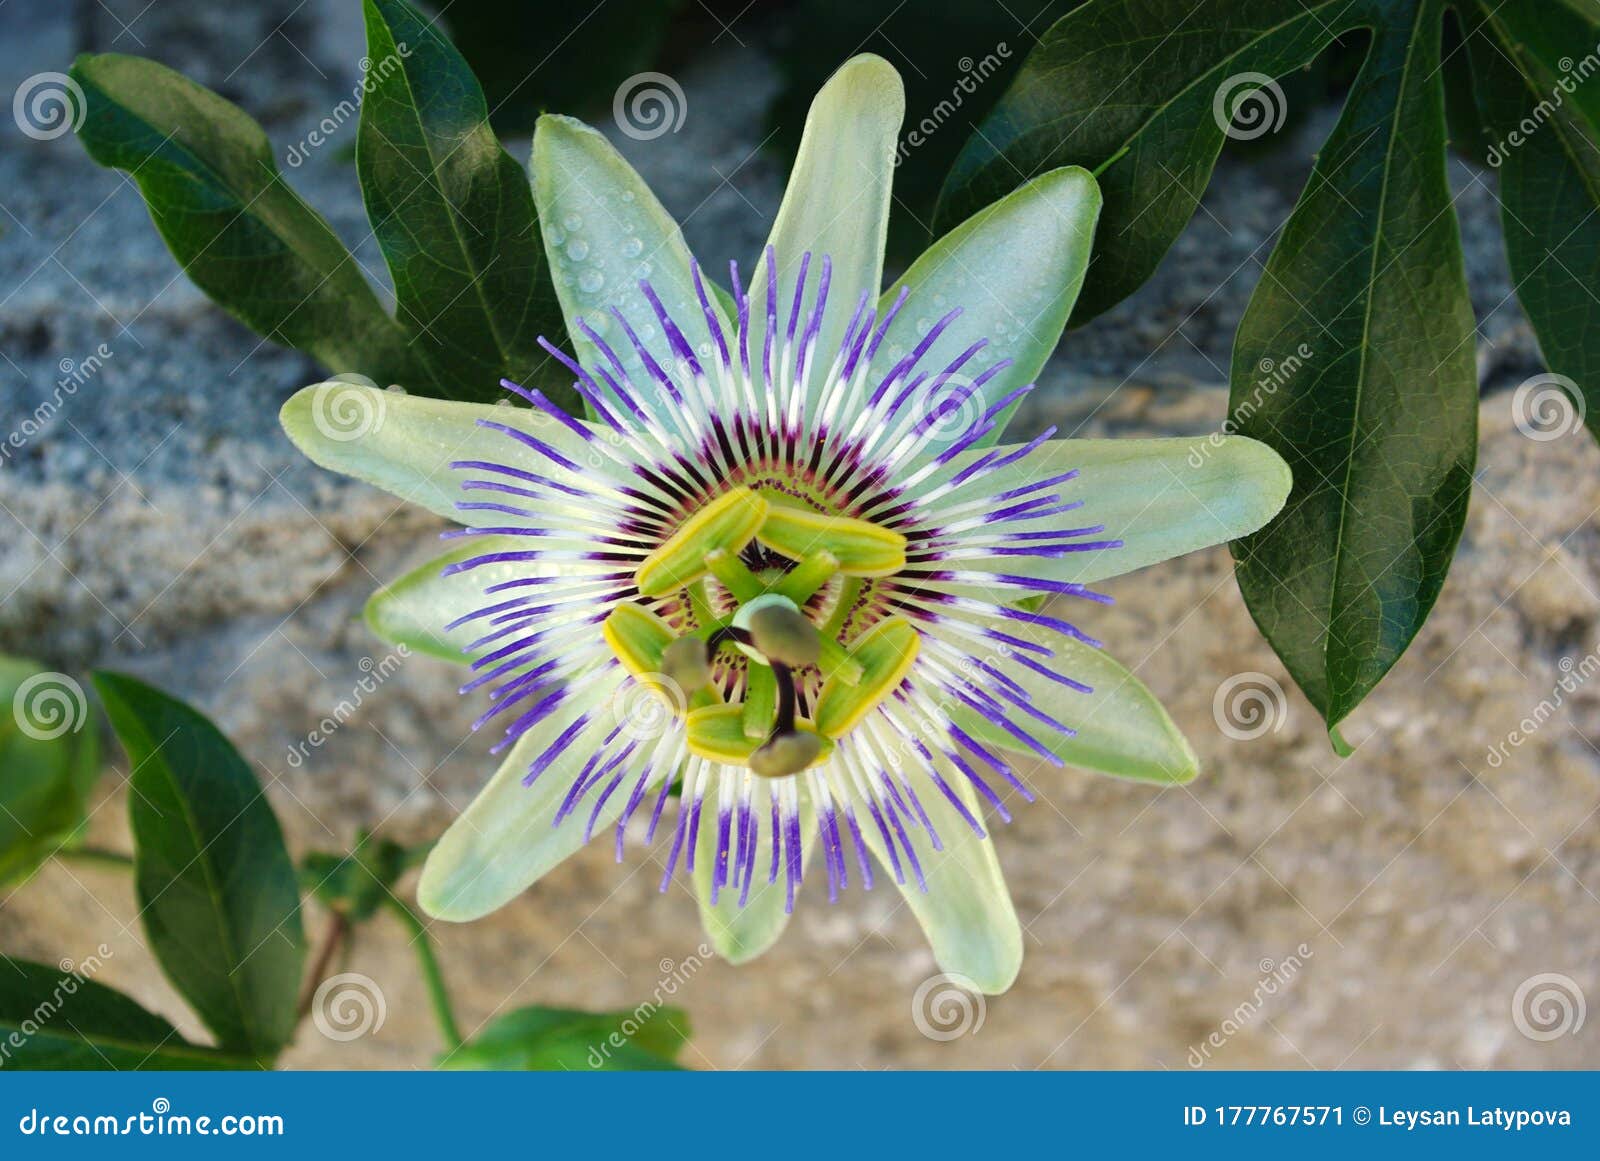 Passion Flower Passiflora Caerulea Front View Stock Image Image Of Blooming Blue 177767571